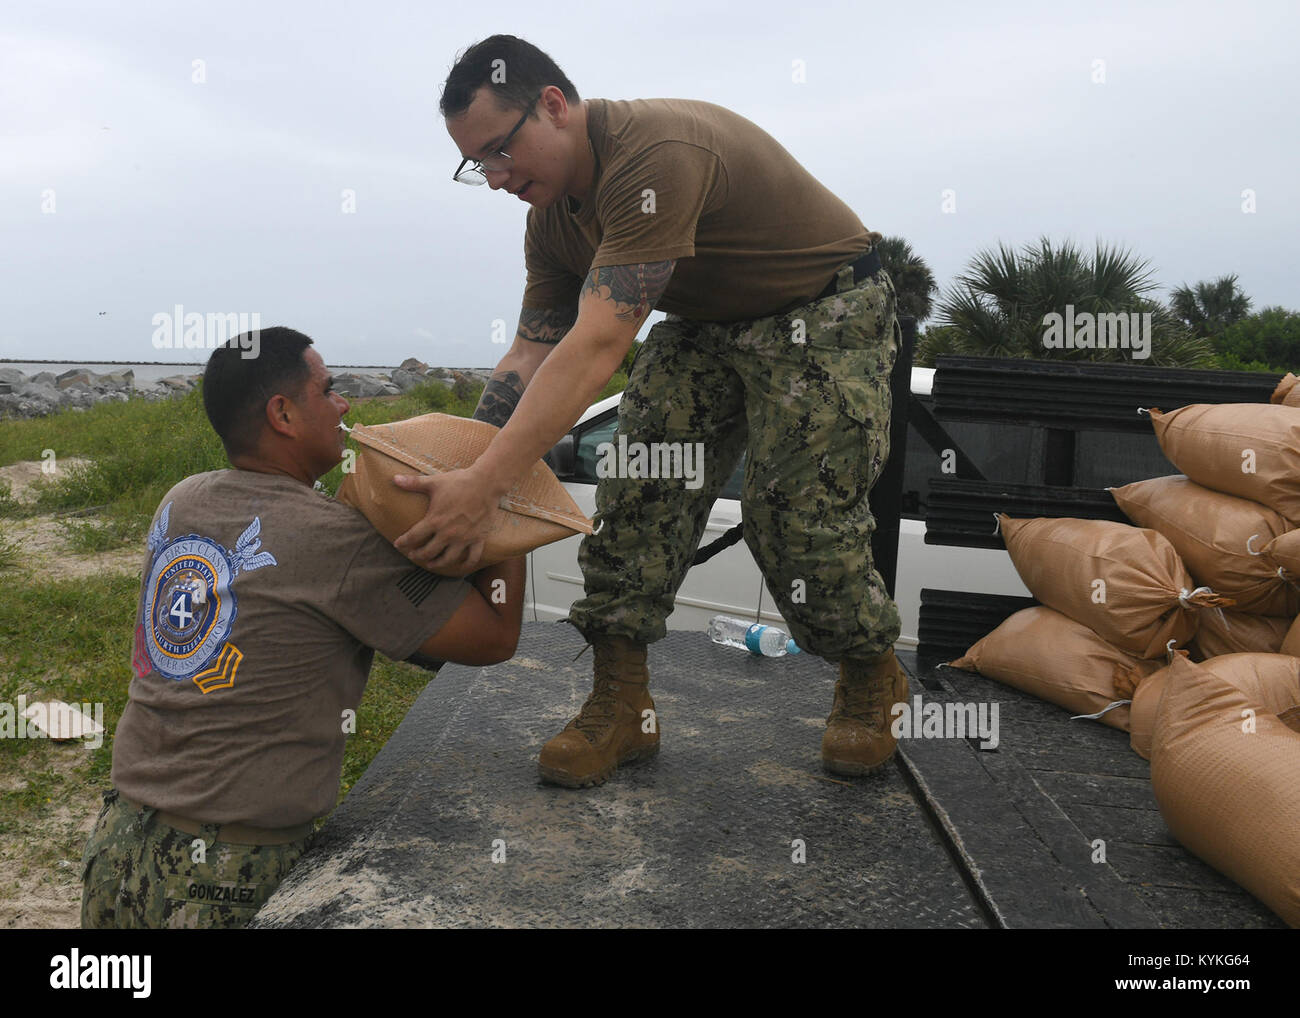 MAYPORT, Fla. (Sept. 6, 2017) Command Master Chief Johannes Gonzales, left, and Logistics Specialist 1st Class Jesus Manriquez, both assigned to U.S. Naval Forces Southern Command/U.S. 4th Fleet (USNAVSO/FOURTHFLT) stack sand bags into a truck to pre-stage them around USNAVSO/FOURTHFLT headquarters in preparation for Hurricane Irma. (U.S. Navy photo by Mass Communication Specialist 2nd Class Michael Hendricks/Released) 170906-N-PQ607-031 Stock Photo